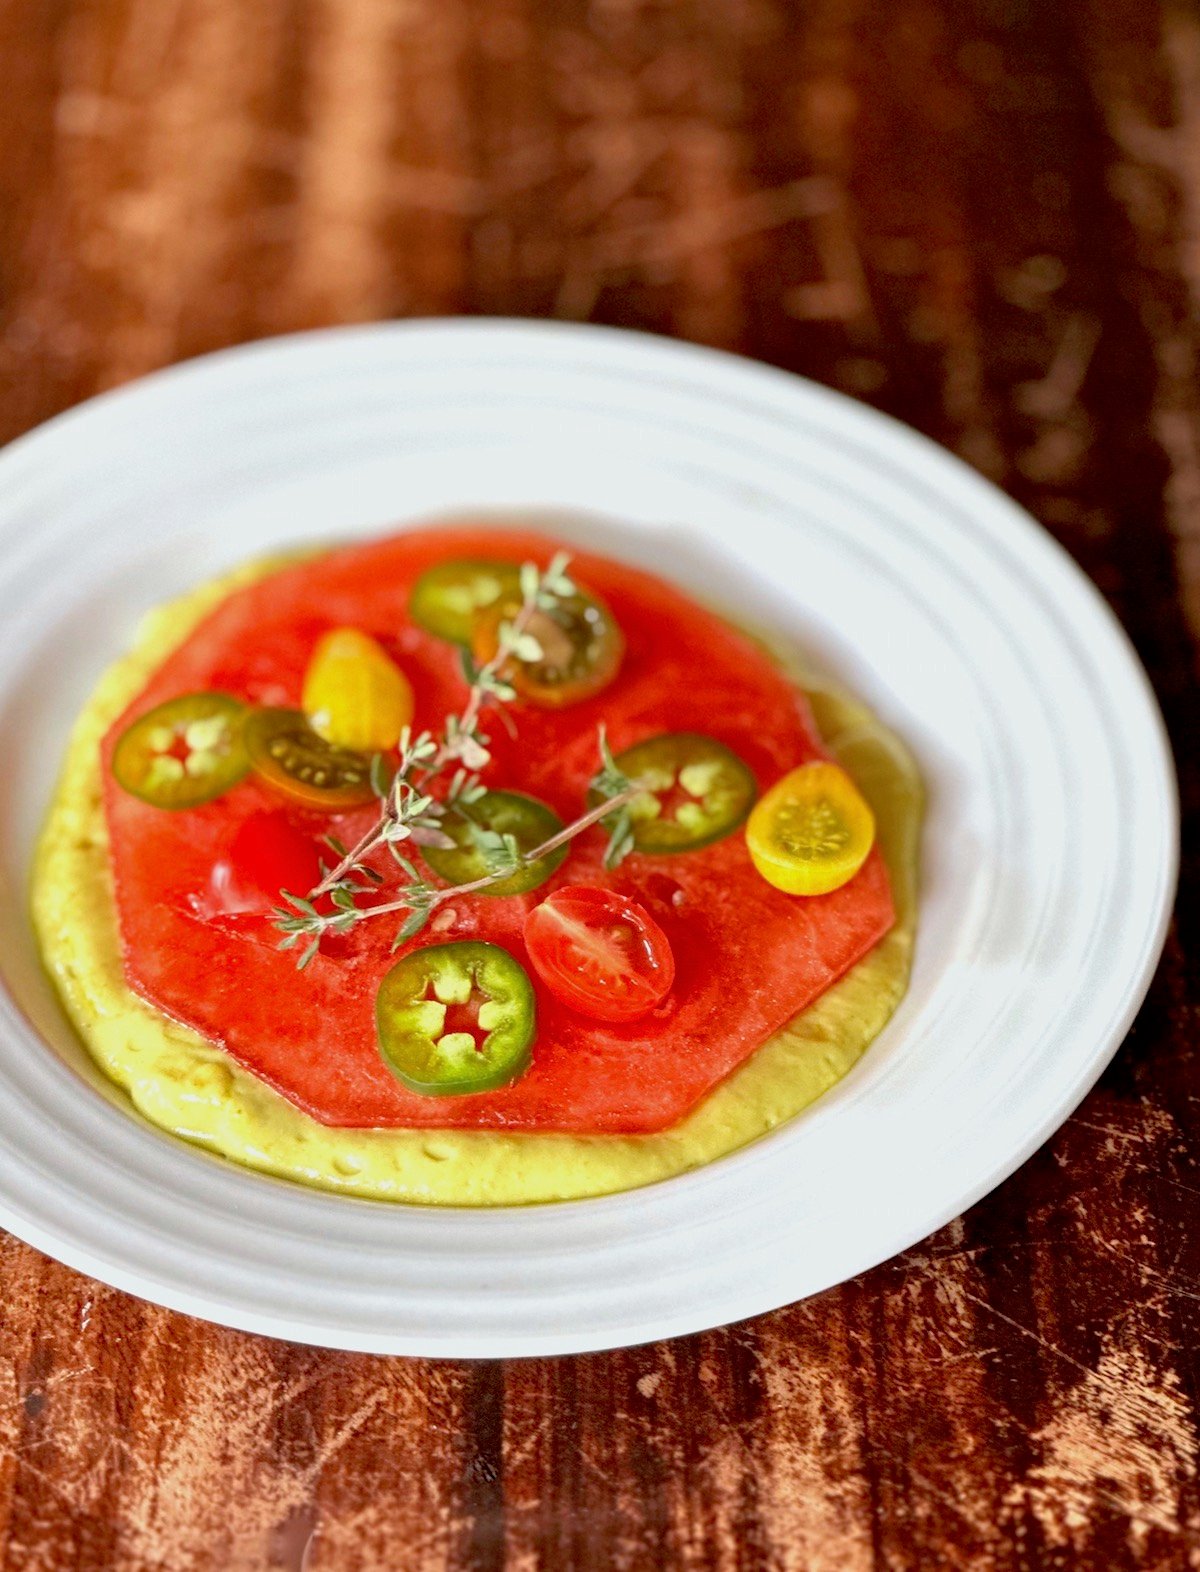 One round piece of compressed watermelon on a white plate with jalapeno and tomato slices and sprig of thyme.